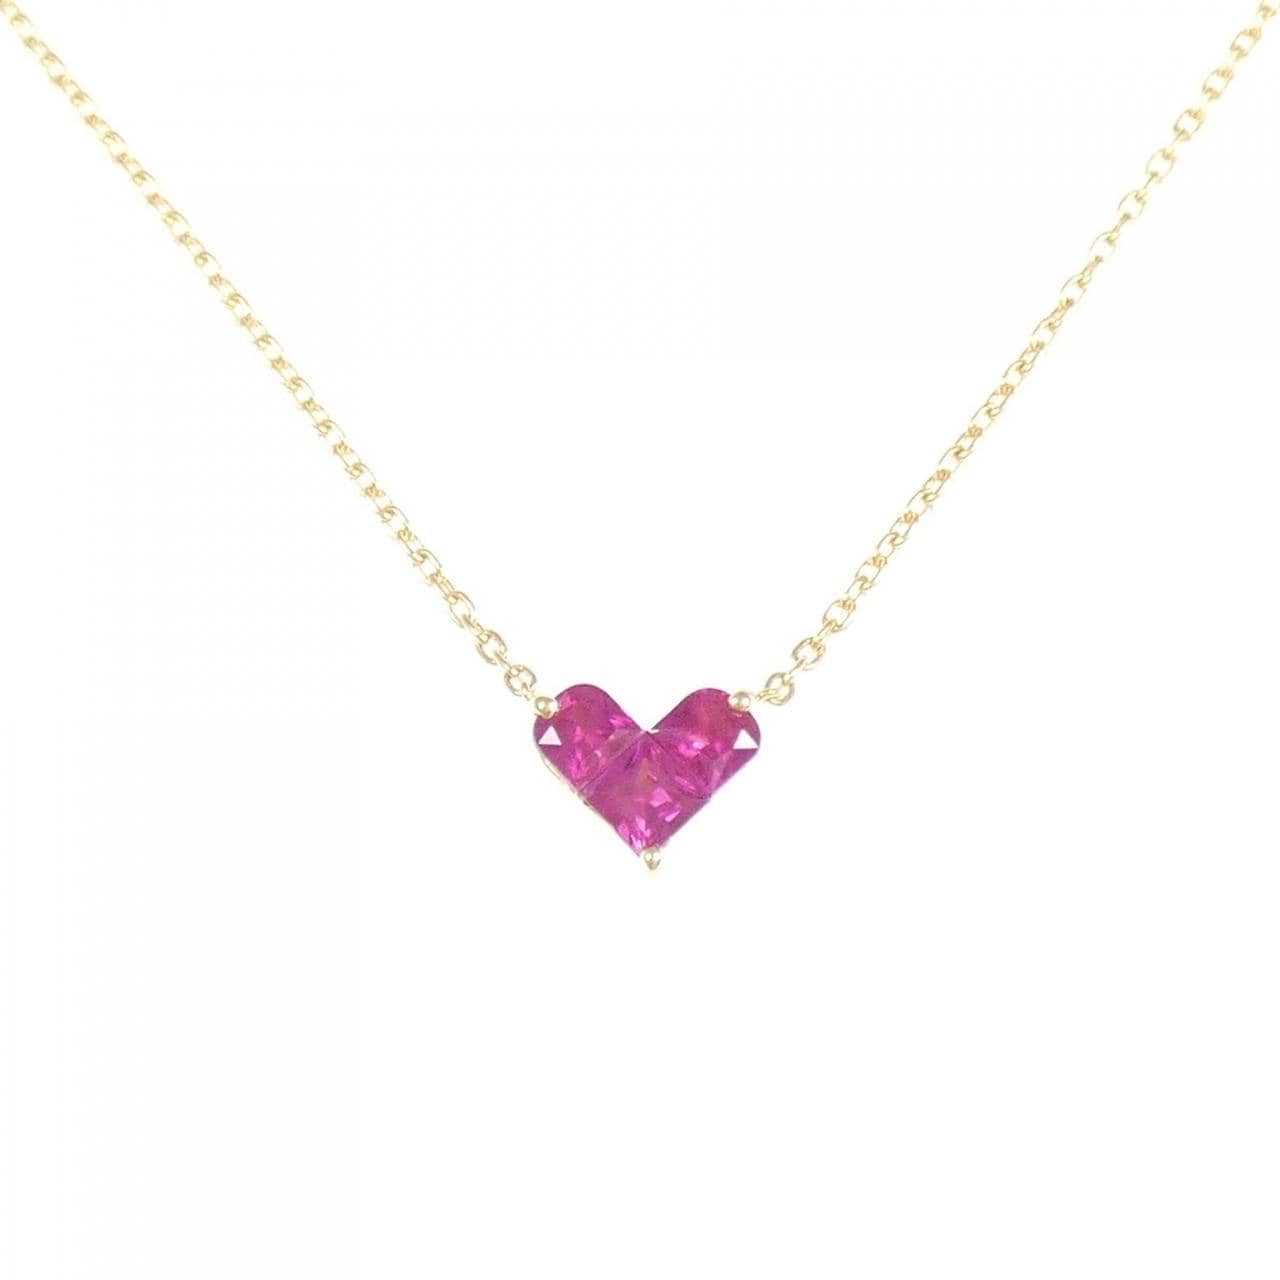 STAR JEWELRY Mysterious Heart 09 Isetan limited Necklace 0.50CT